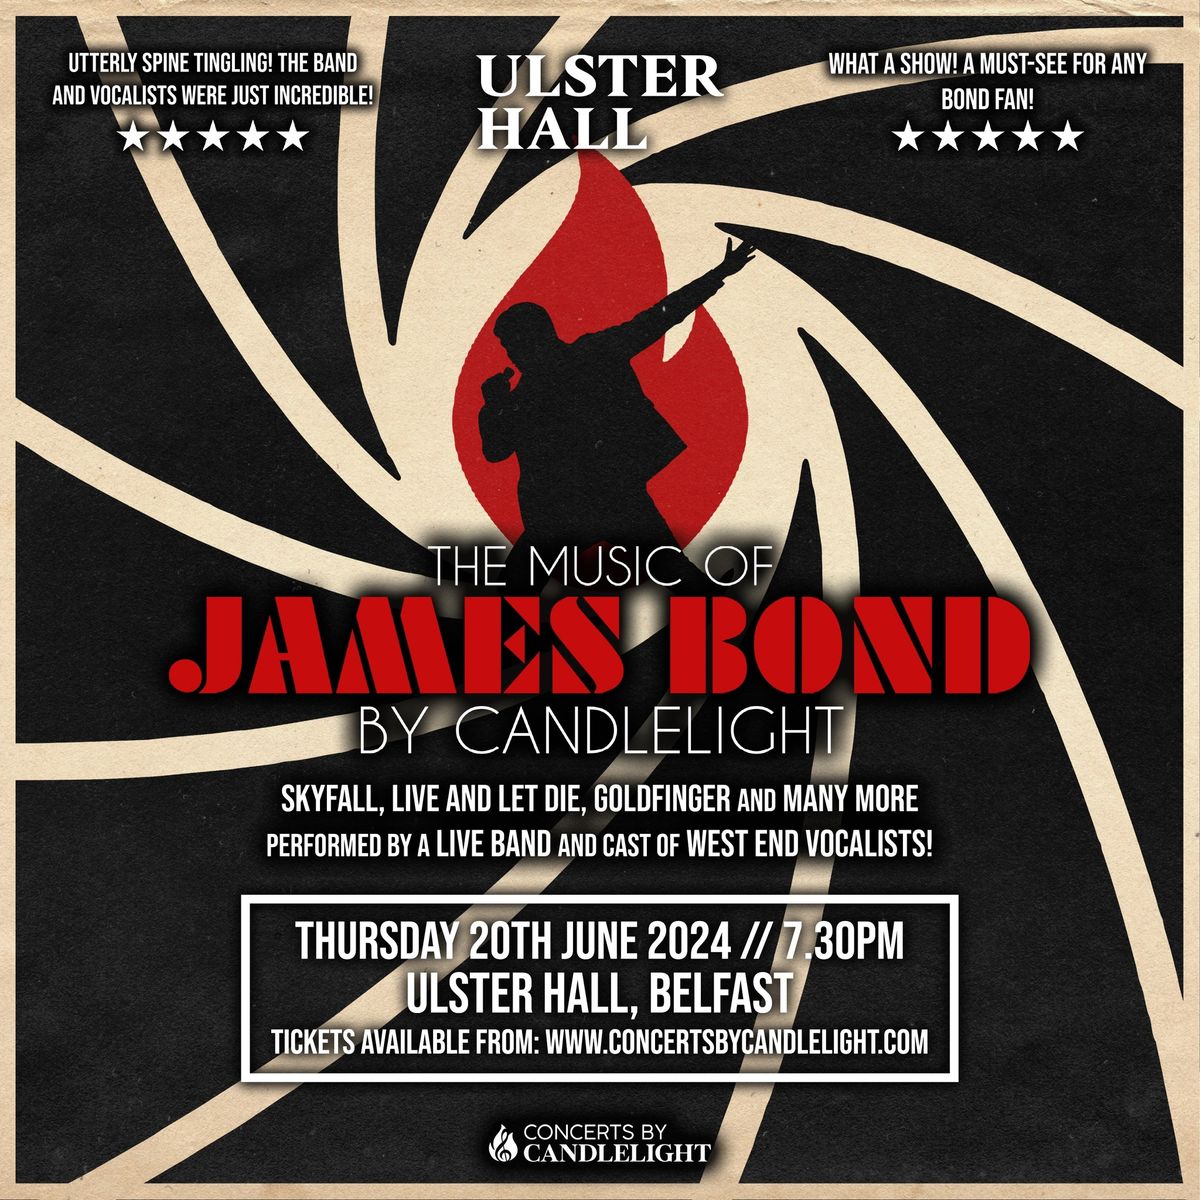 The Music Of James Bond By Candlelight At Ulster Hall, Belfast